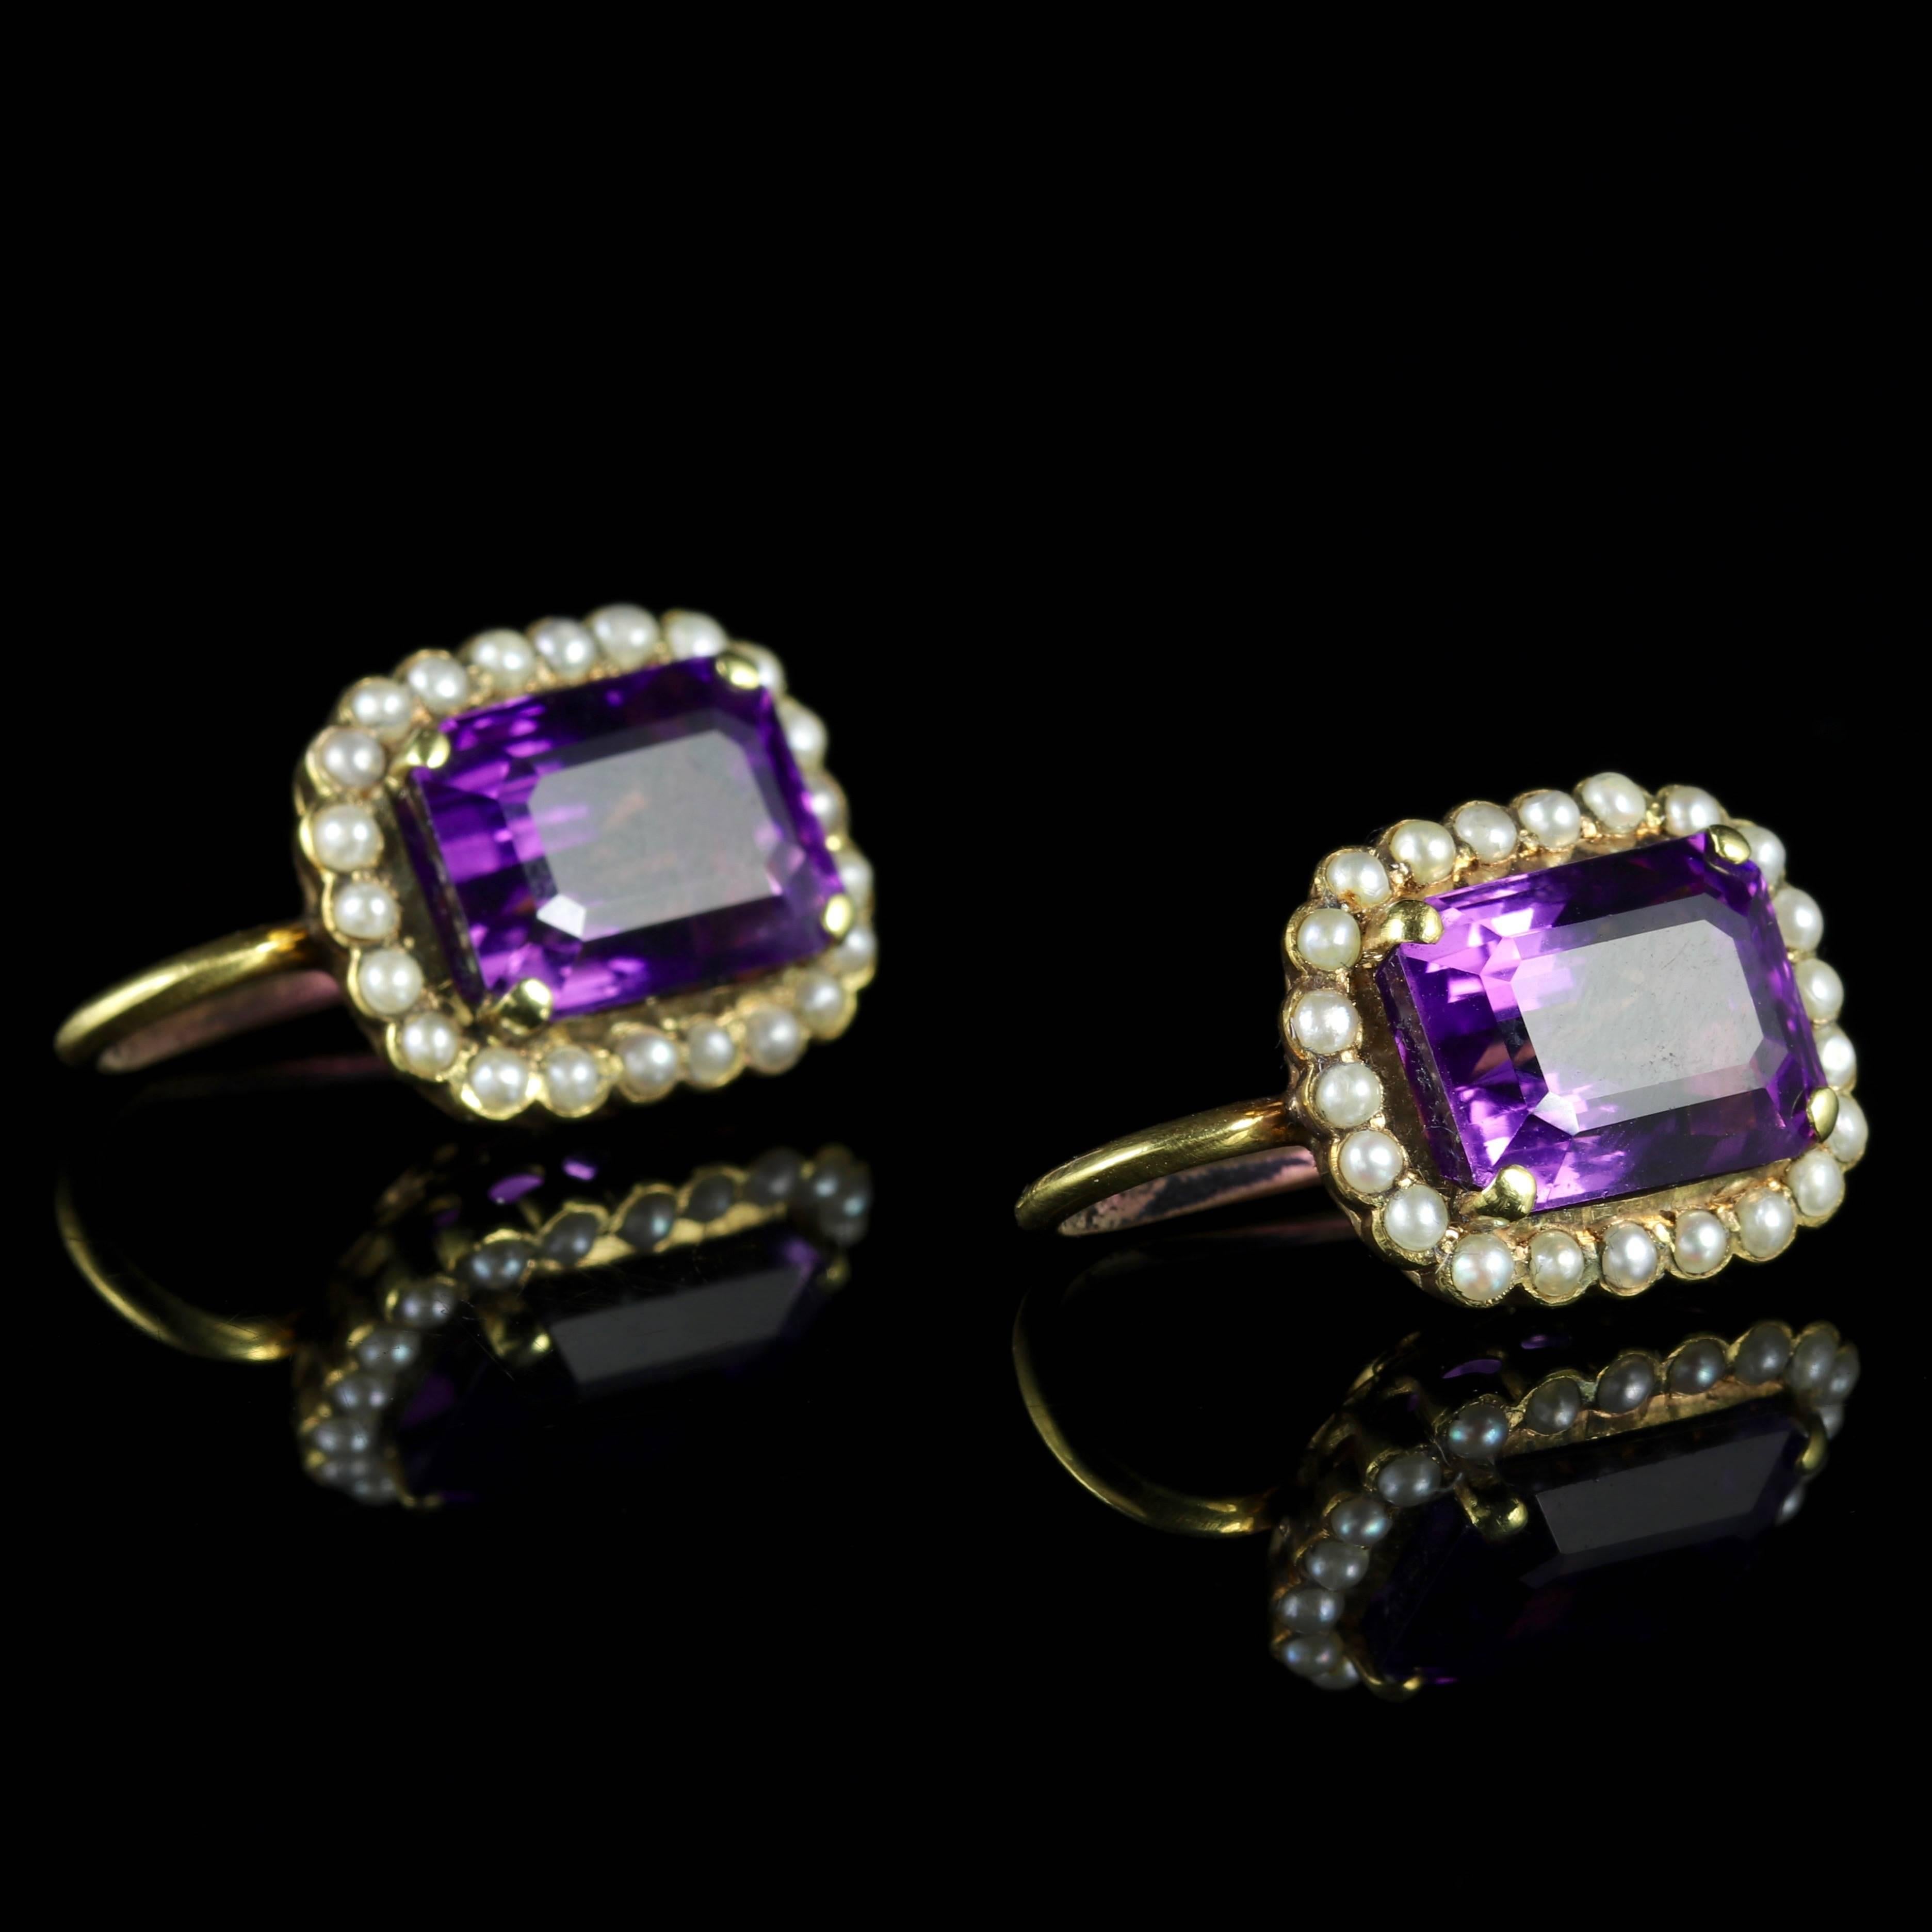 Antique Victorian Gold Amethyst Pearl Earrings 18 Carat Gold, circa 1900 1